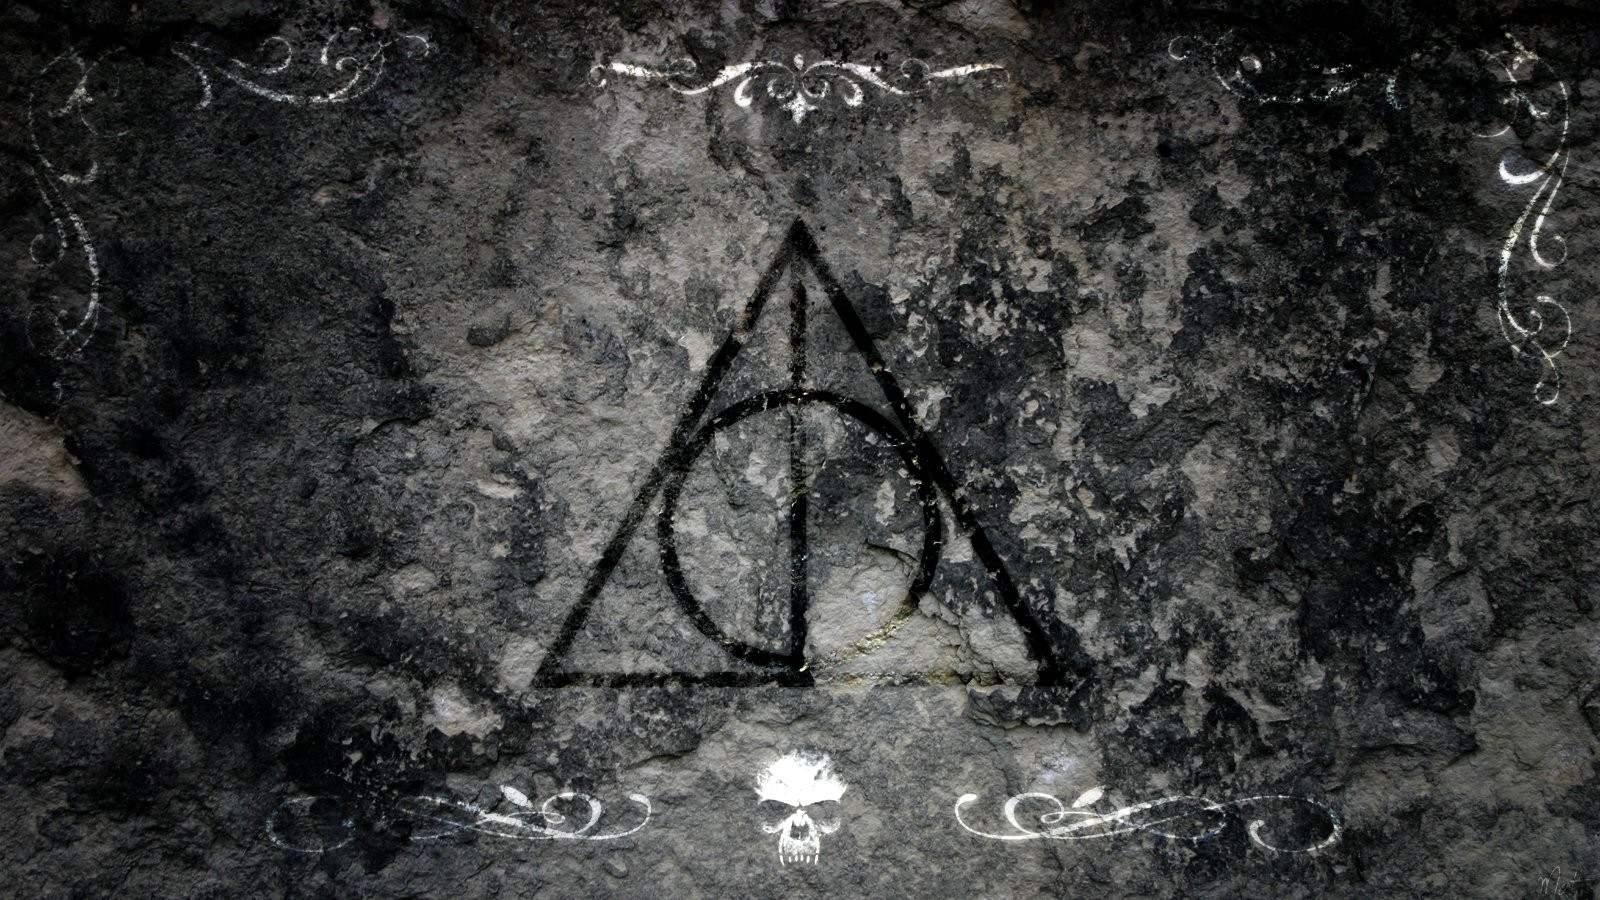 #Harry Potter and the Deathly Hallows, #reliques, #Harry Potter, #movies, #artwork, #symbols, wallpaper. Mocah HD Wallpaper